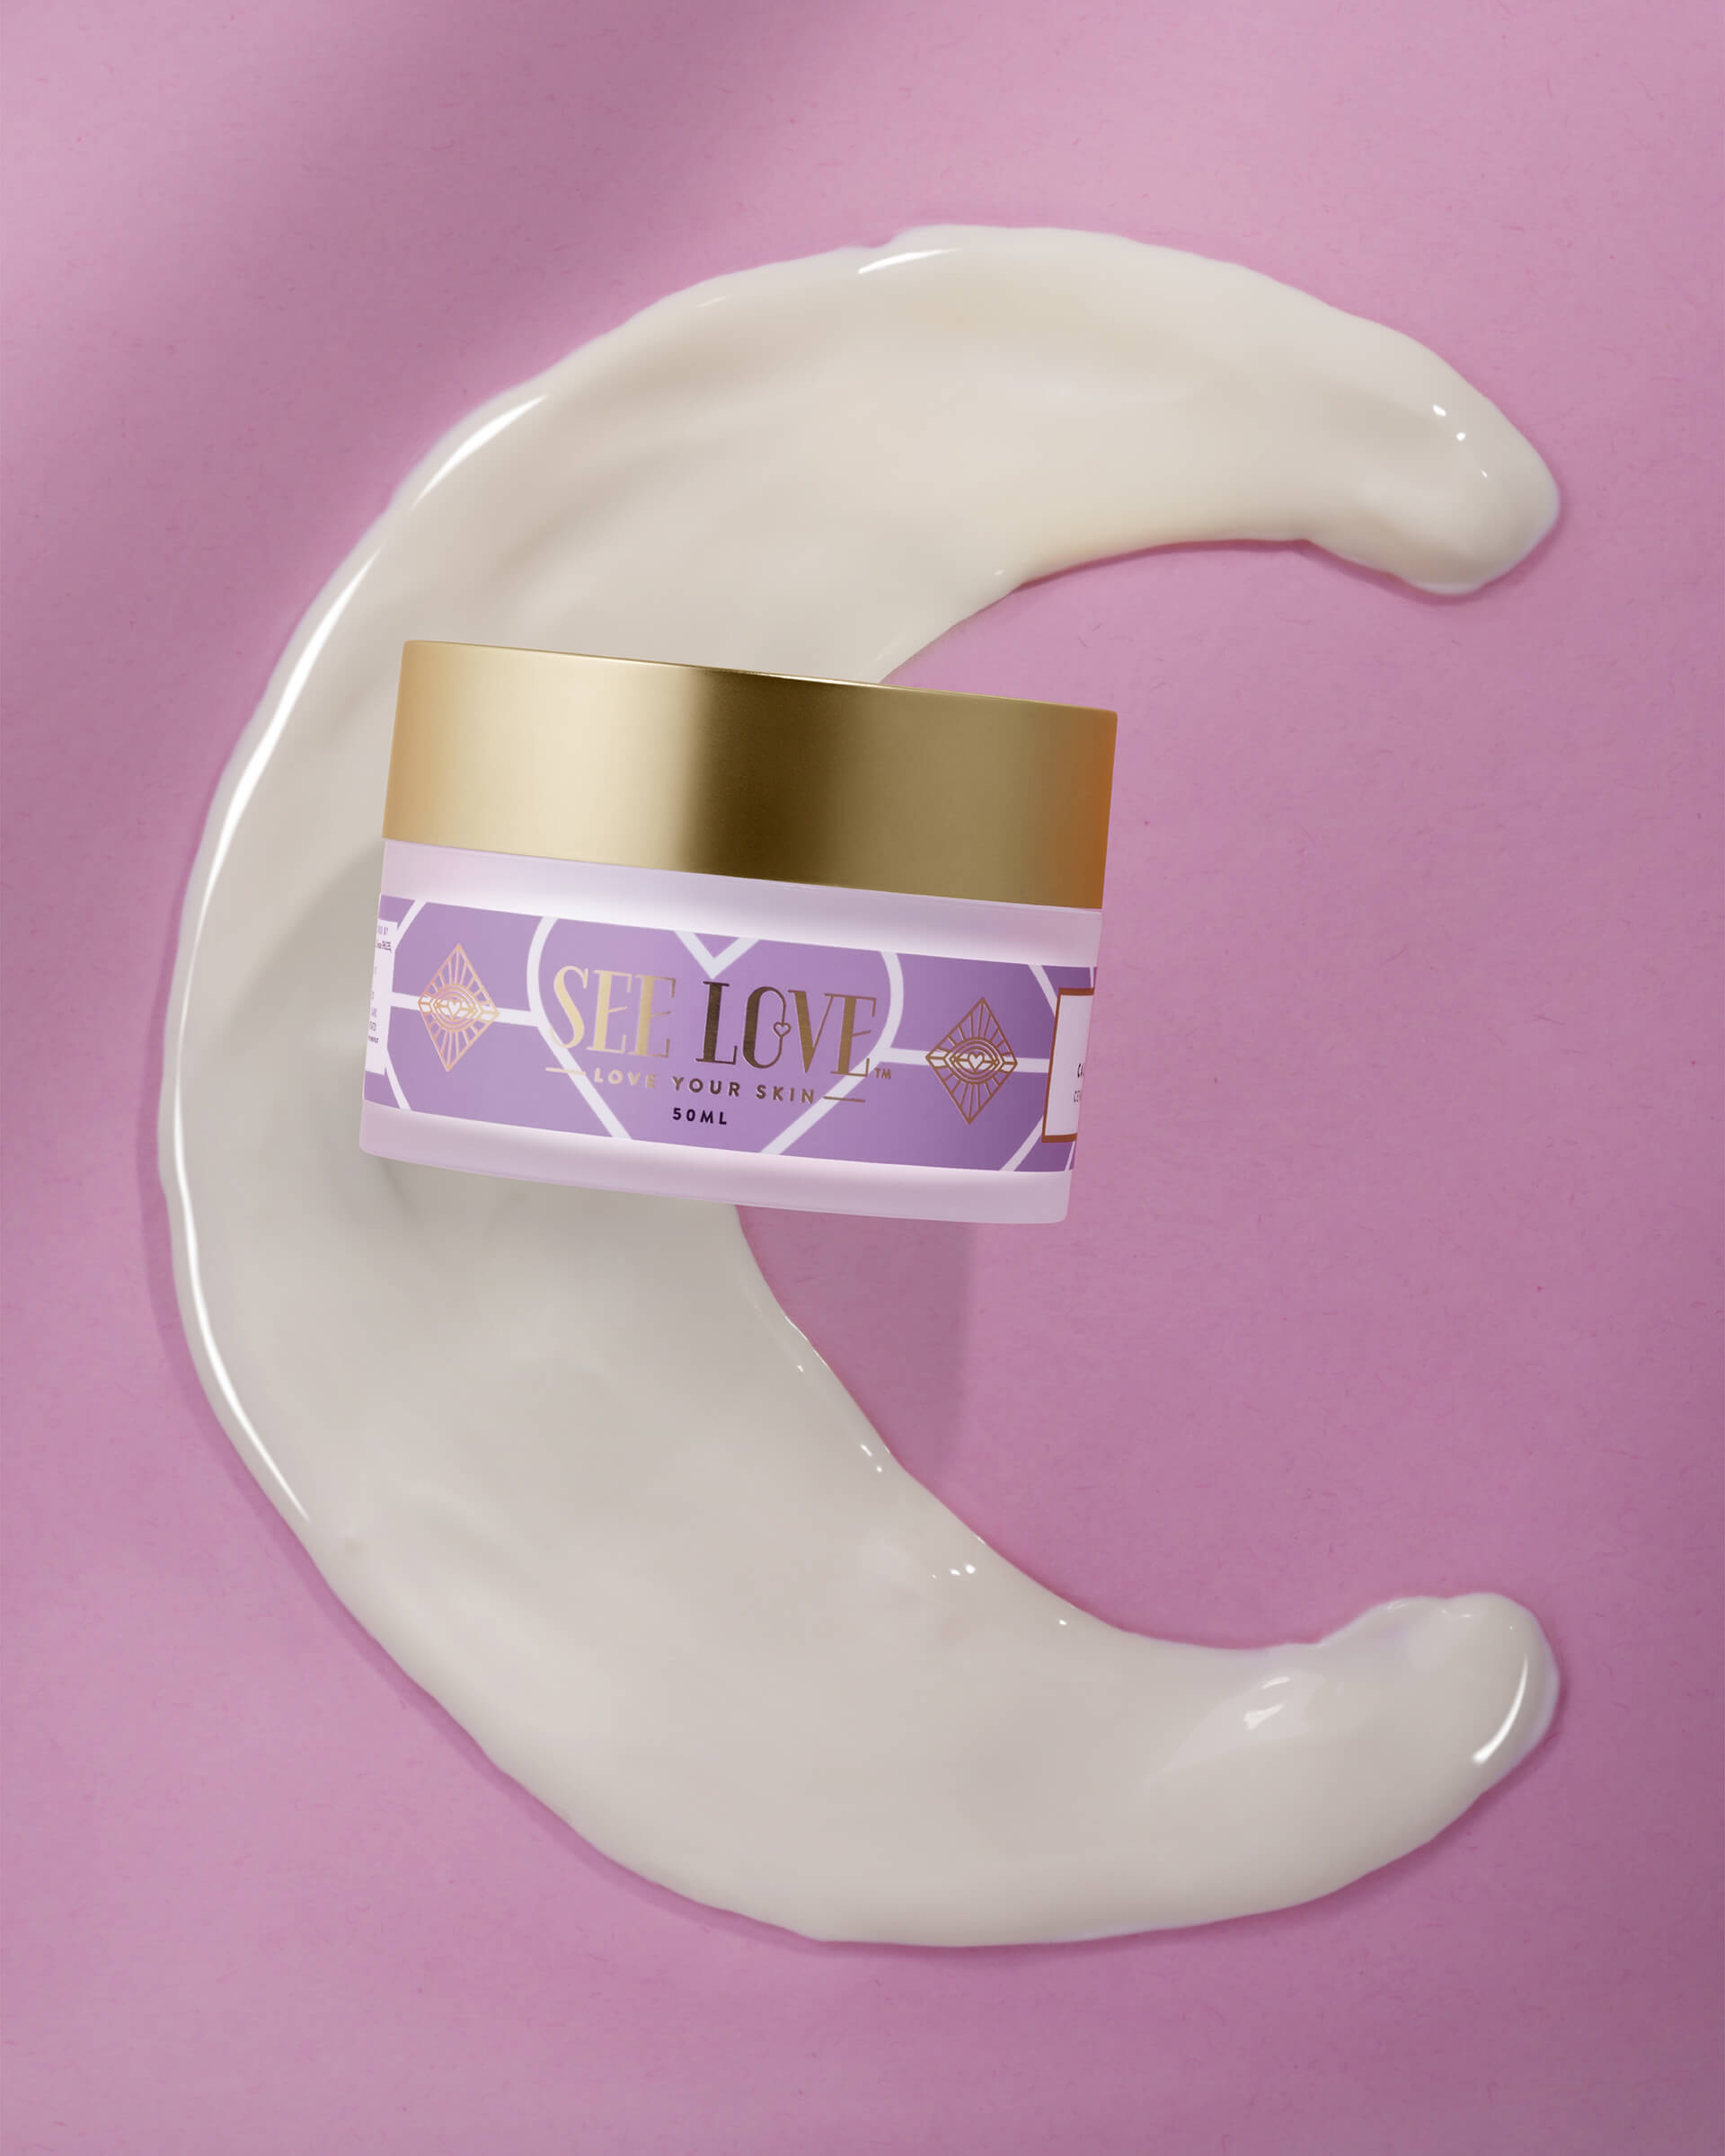 See Love- Calm and Repair Night Crème, moisturizer with ceramides